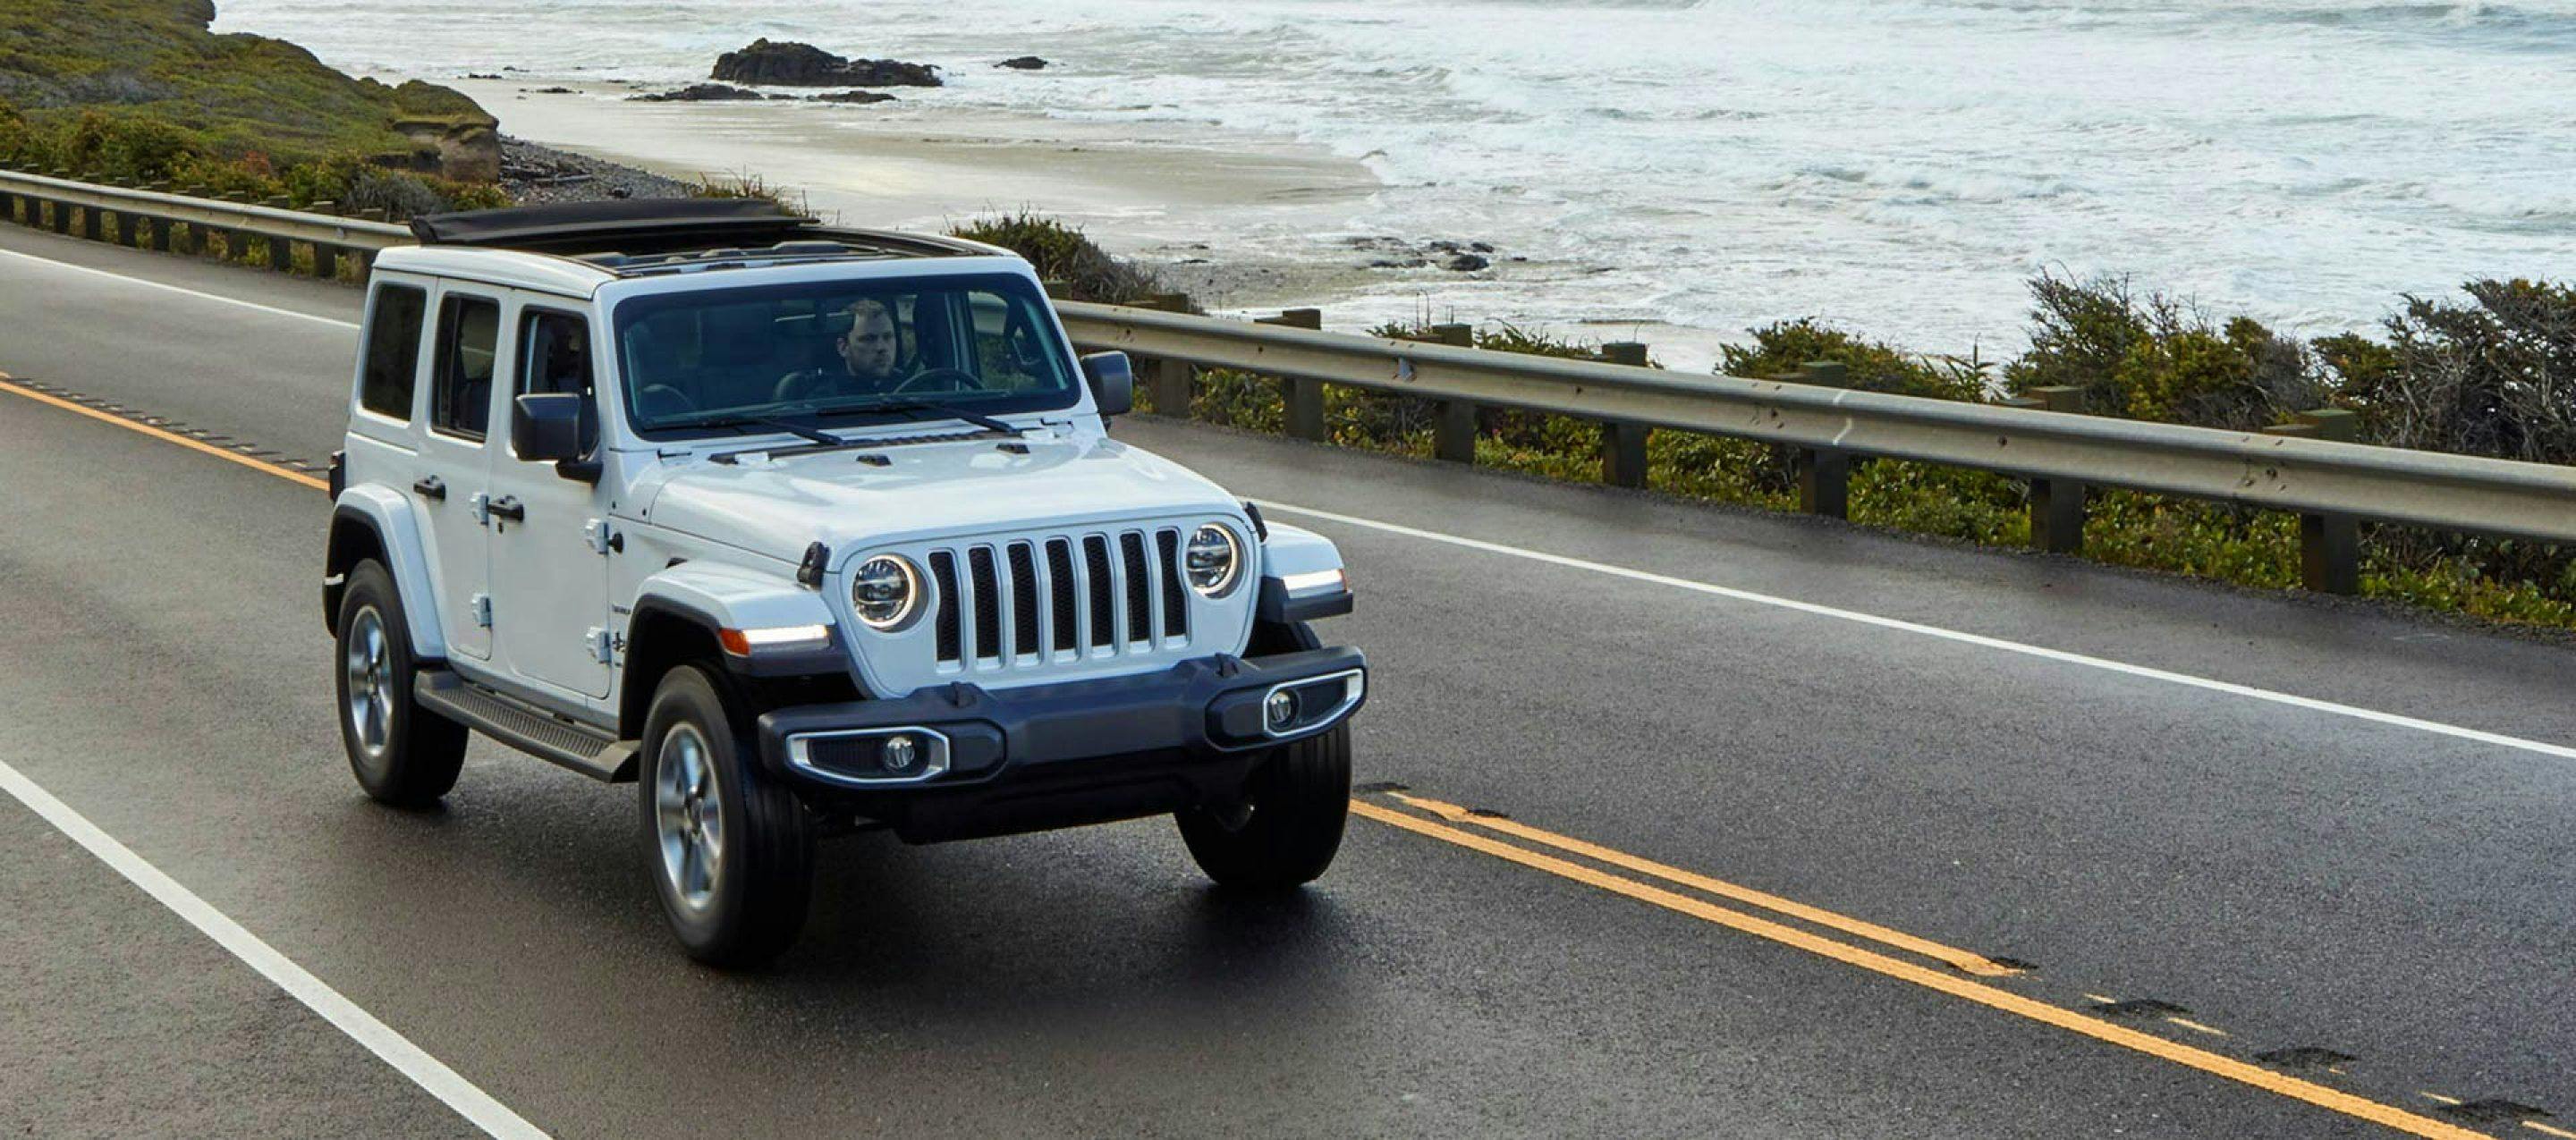 jeep wrangler family and friends pricing diehl chrysler dodge jeep ram butler diehl automotive butler pa